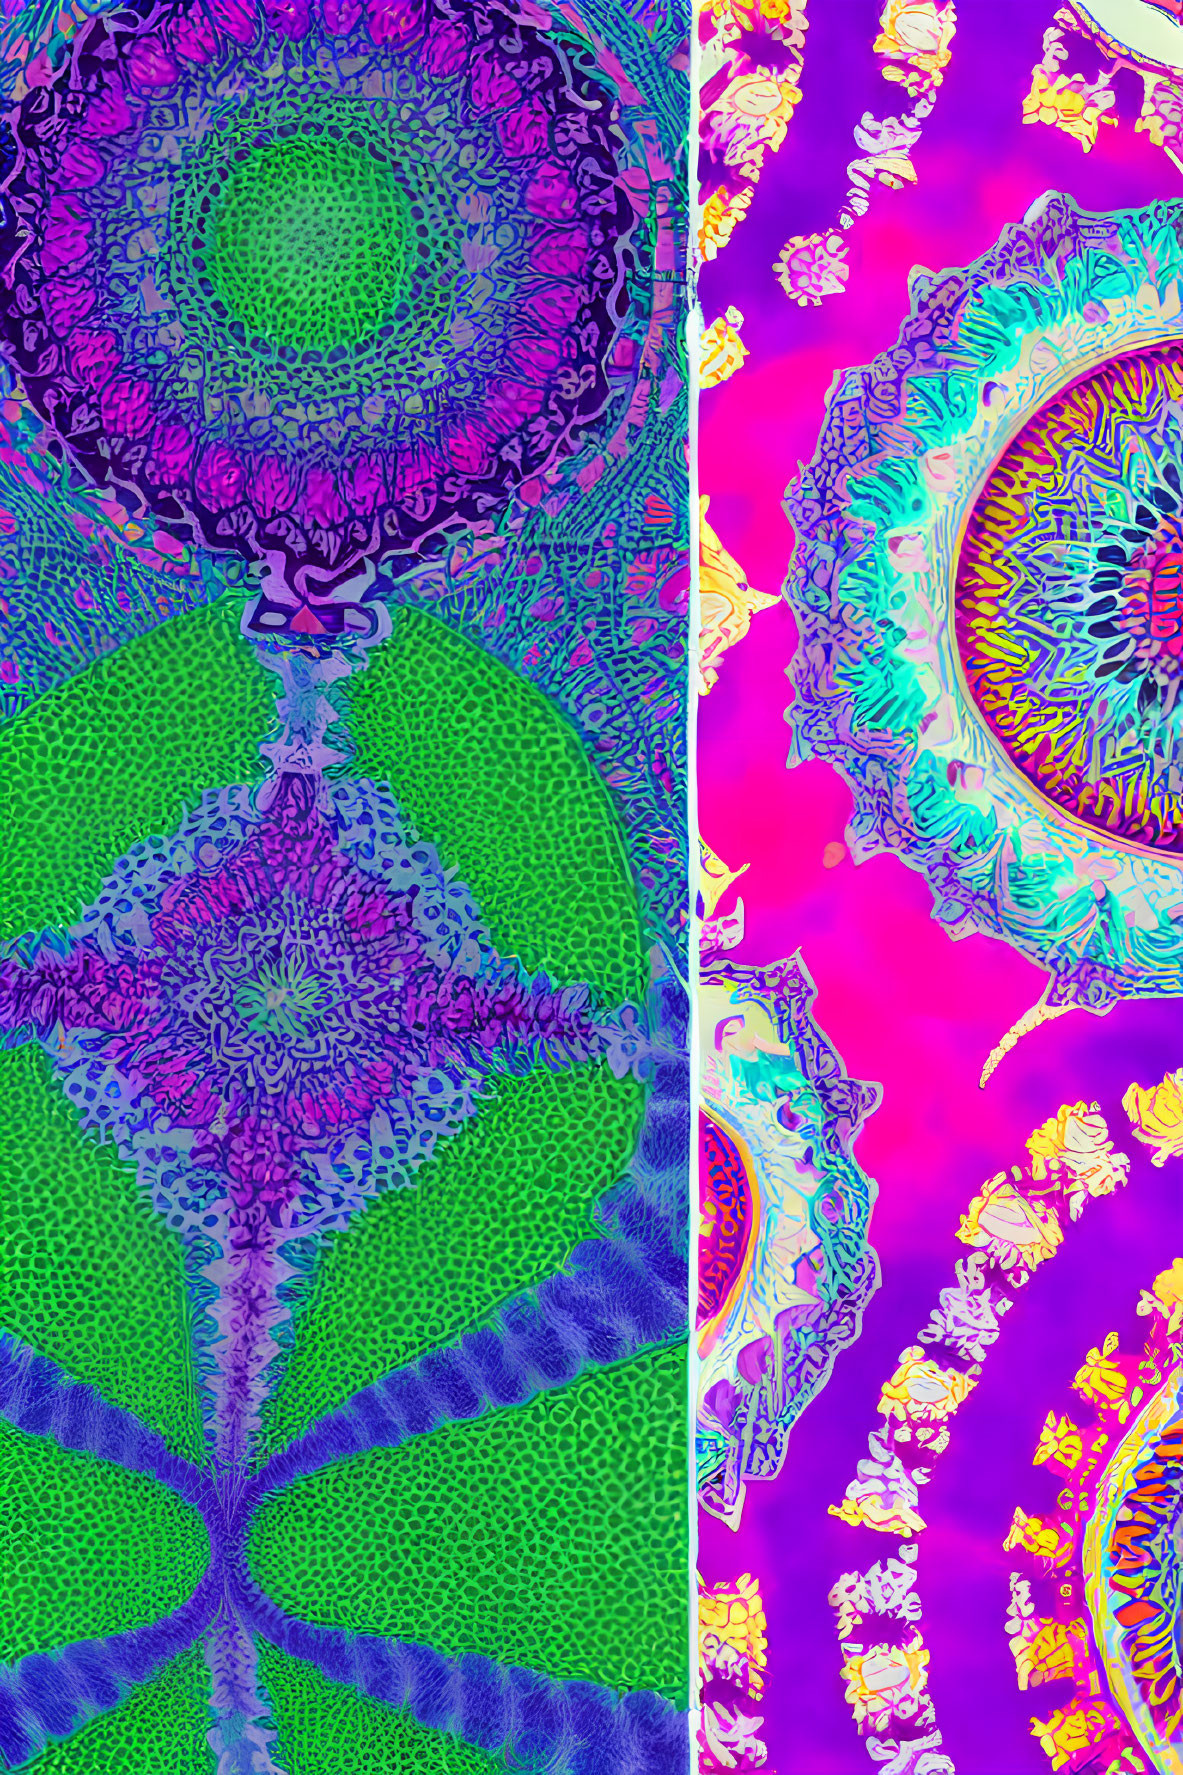 Colorful Psychedelic Mandala Art in Purple, Blue, Green, and Pink